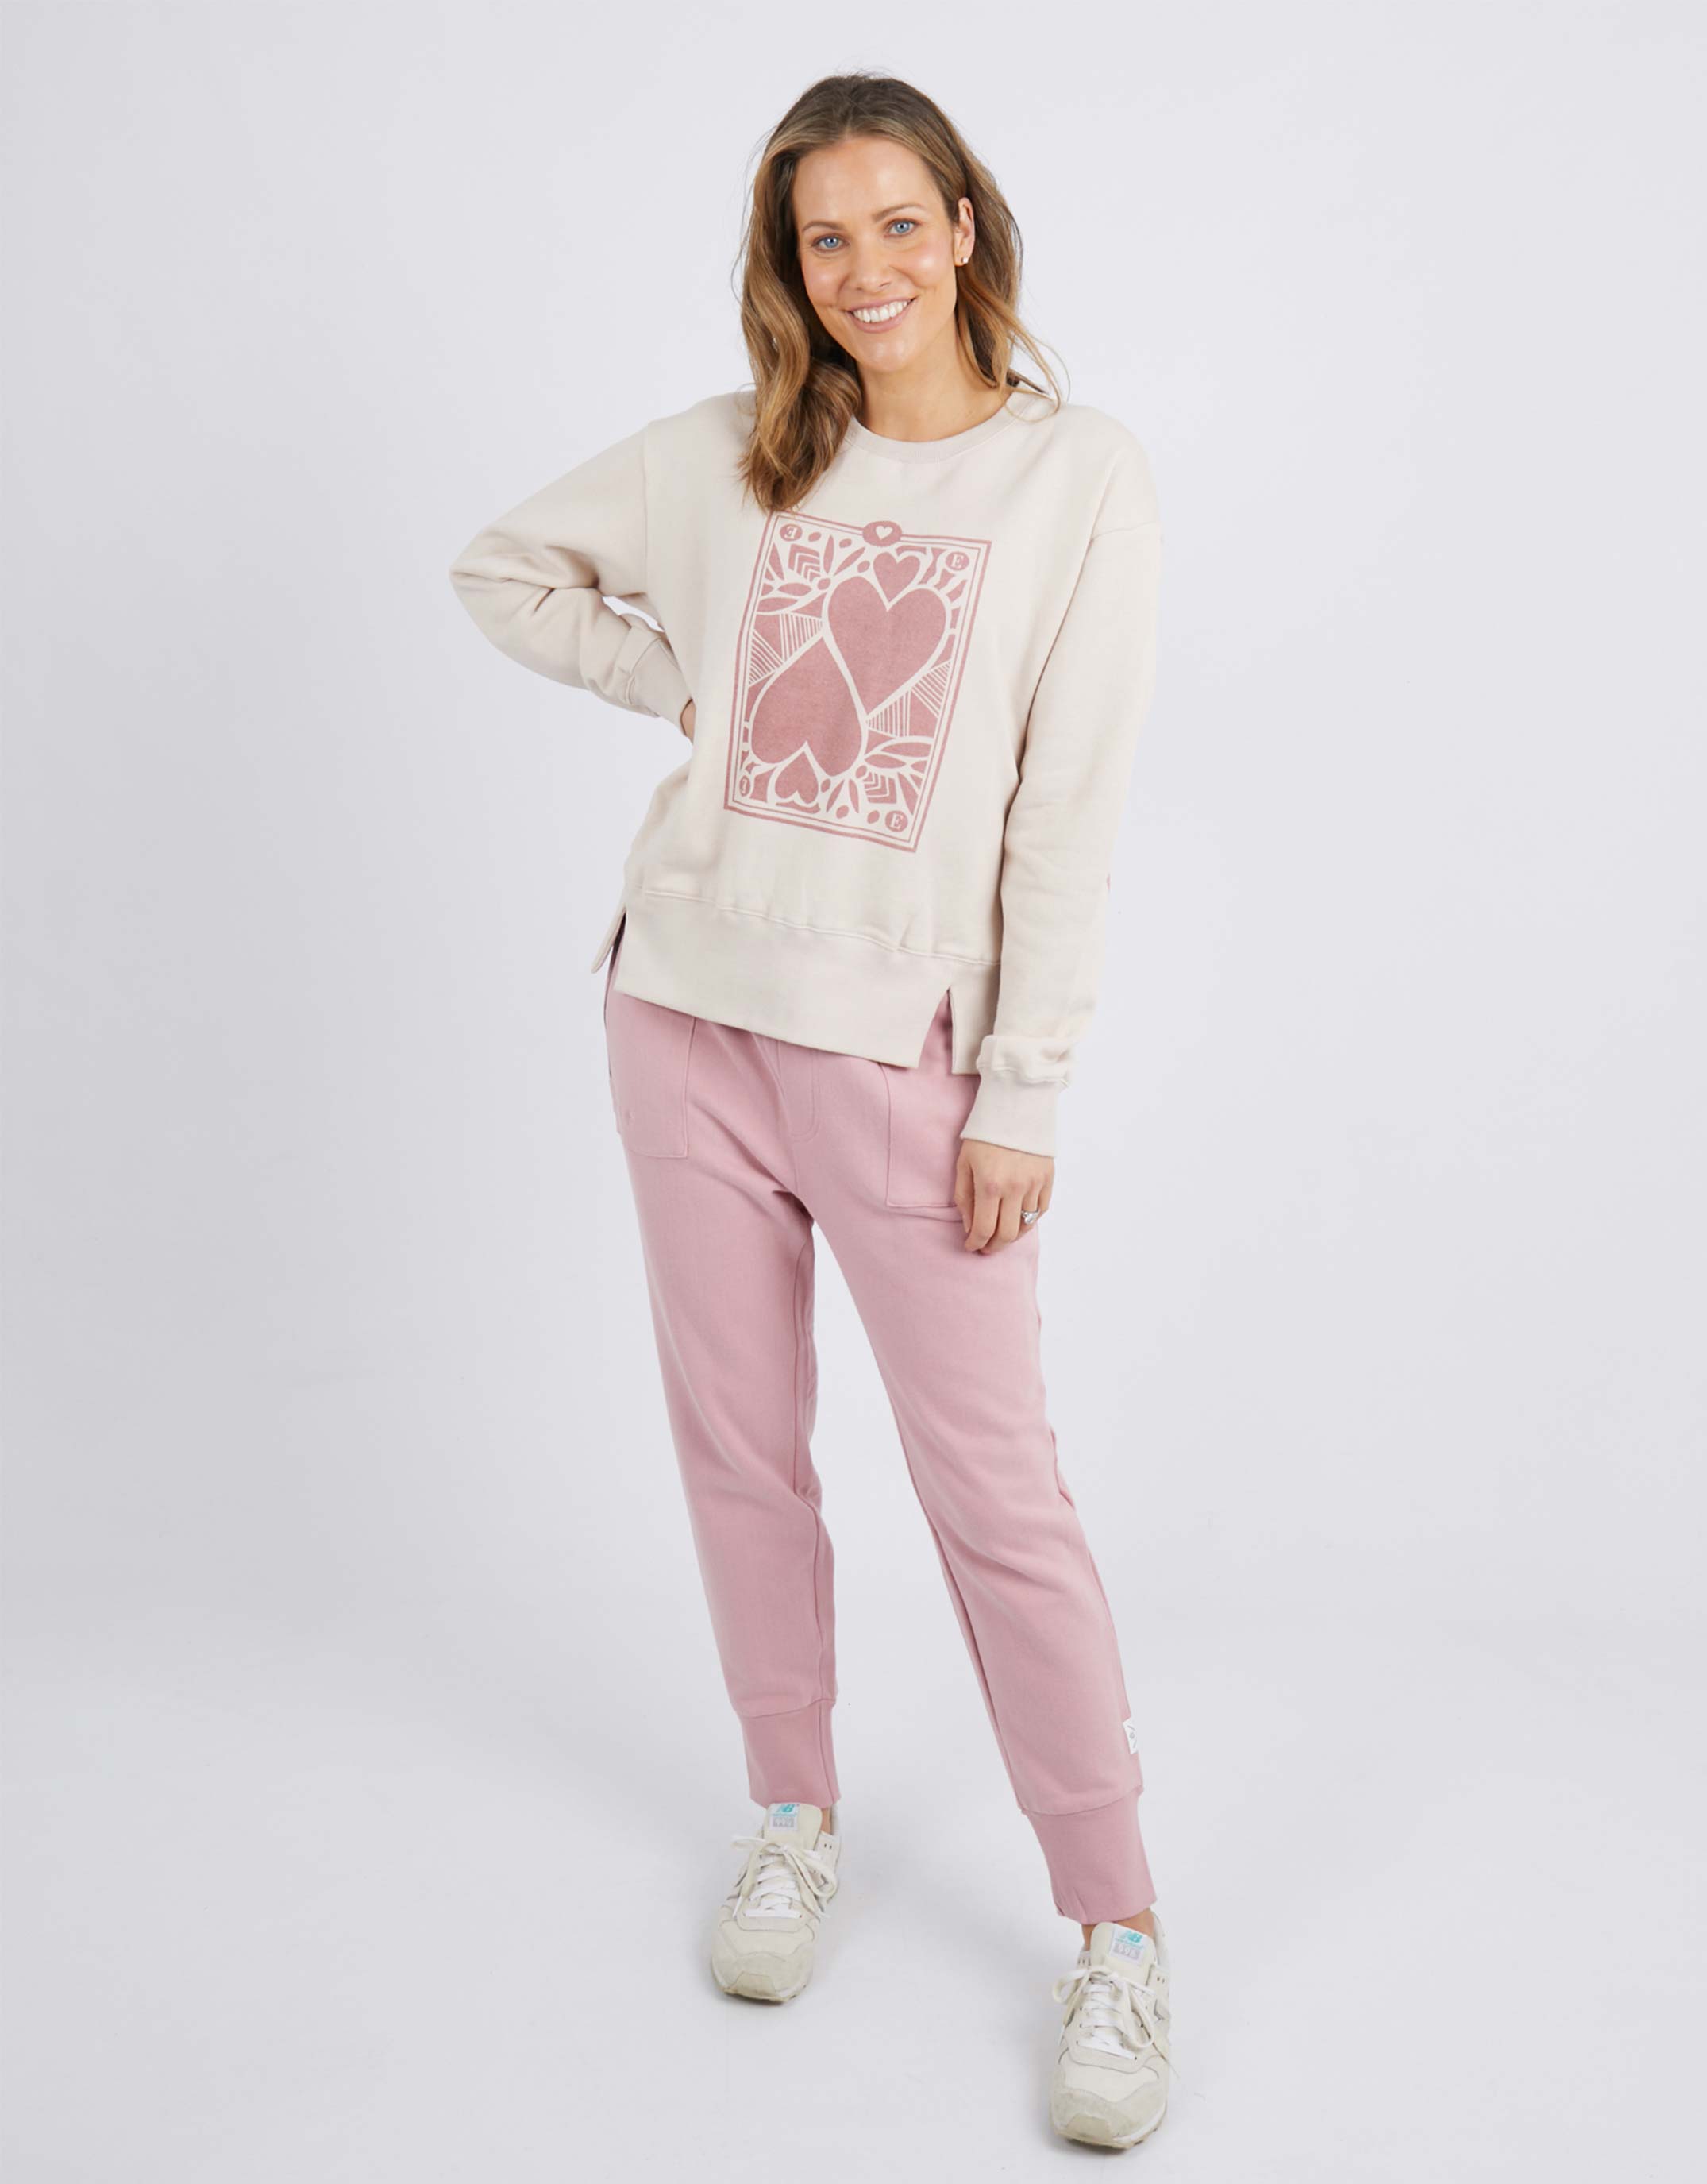 elm-queen-of-hearts-crew-oatmeal-womens-clothing